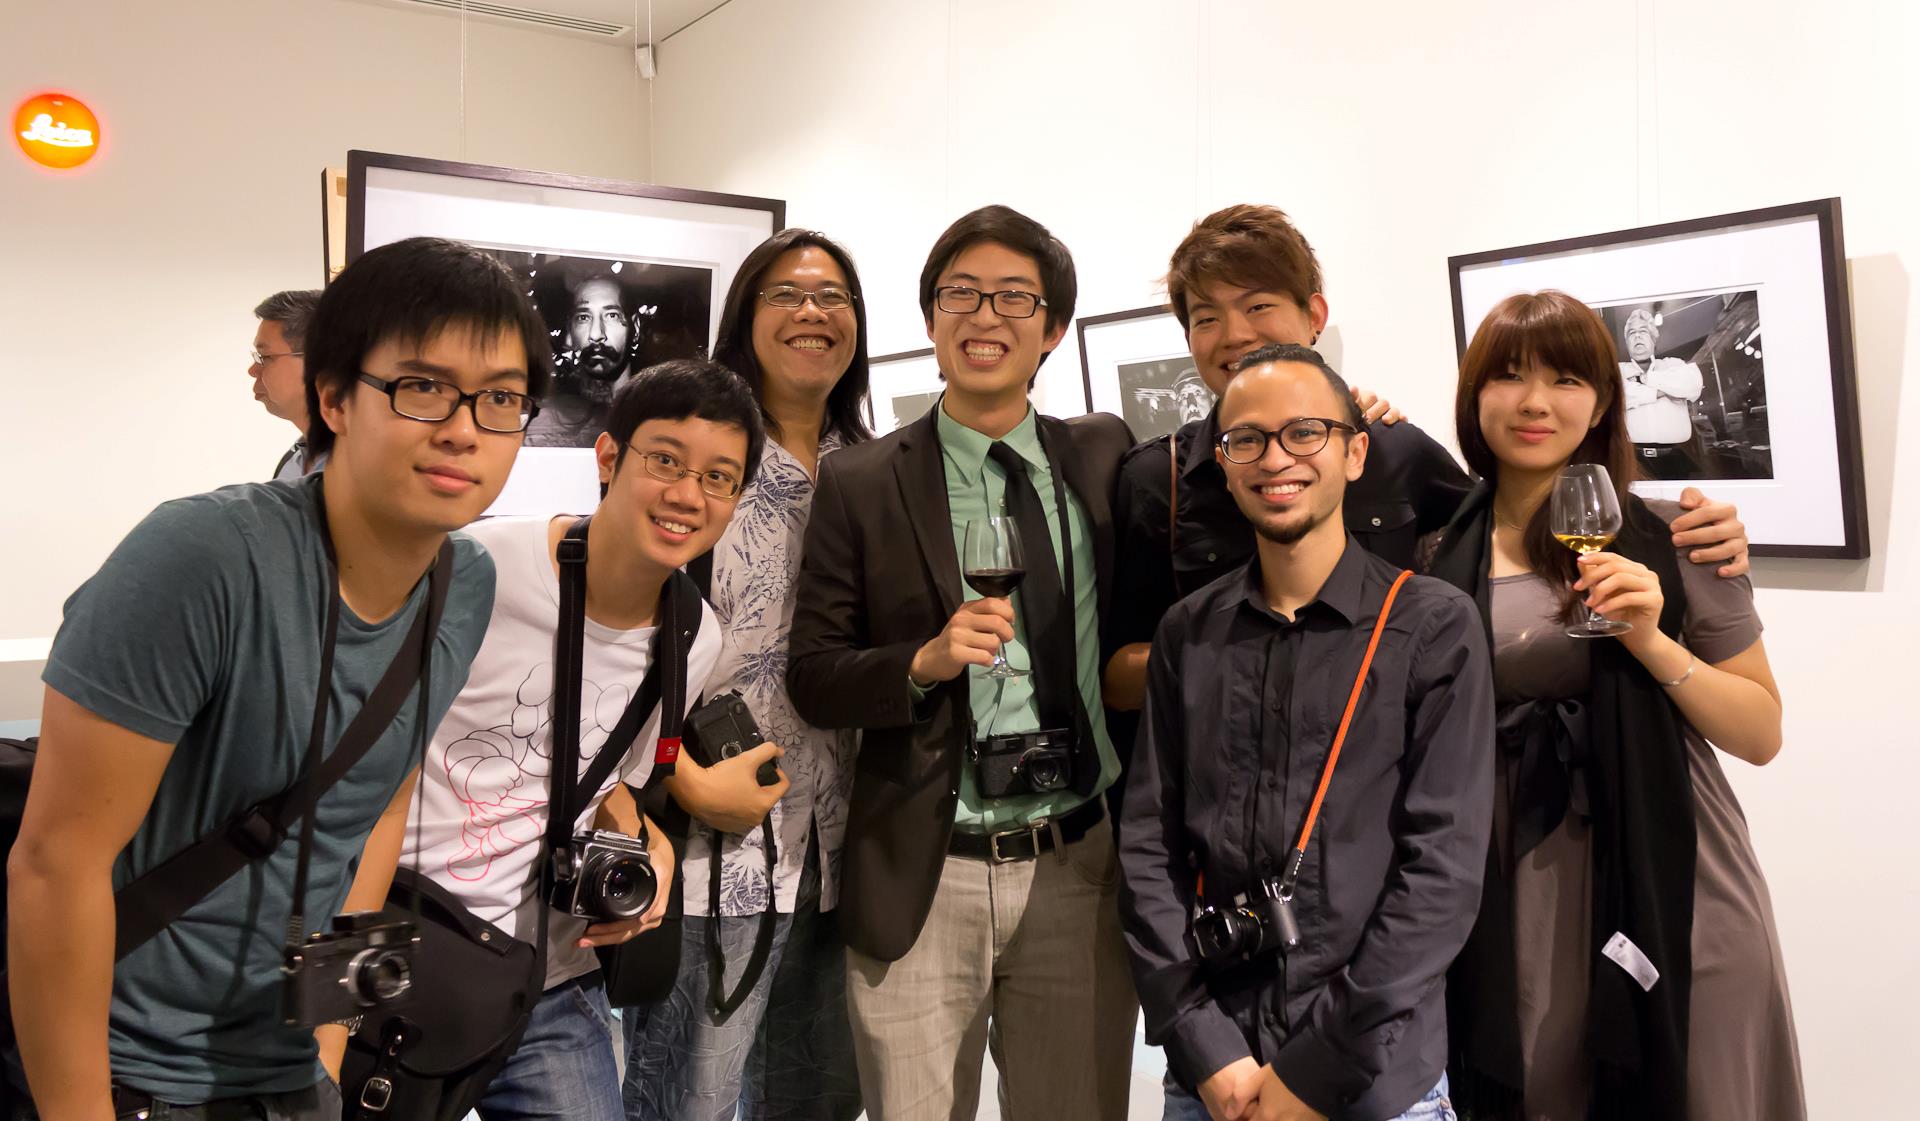 At the Leica store in Singapore for my "Proximity" Exhibition in 2012.